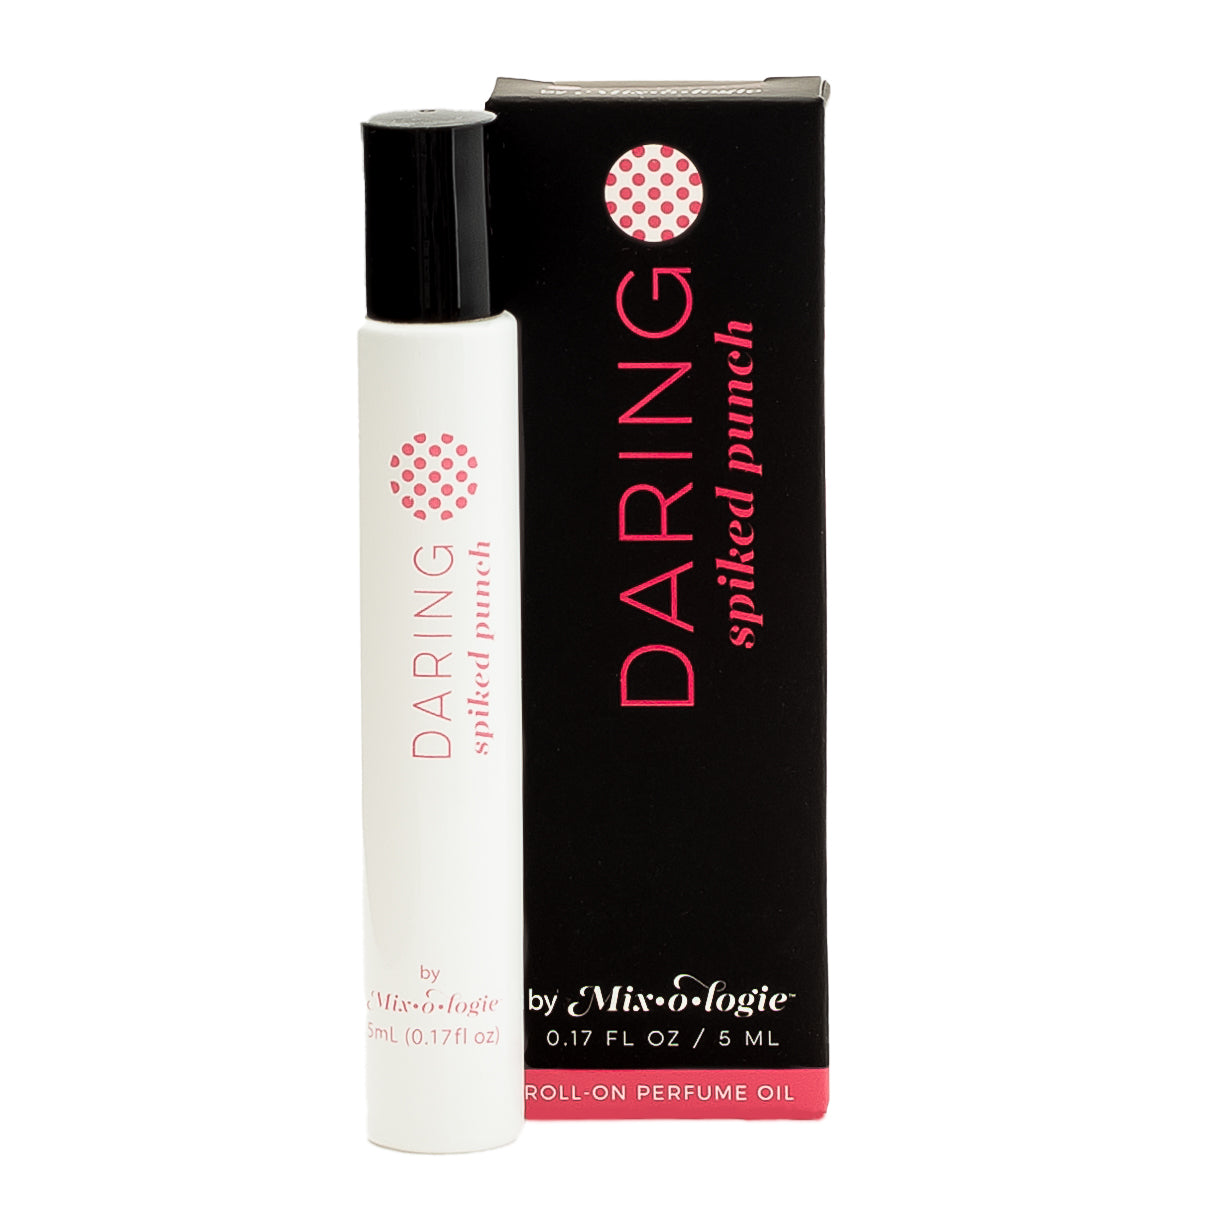 Daring (spiked punch) - Perfume Oil Rollerball (5 mL)